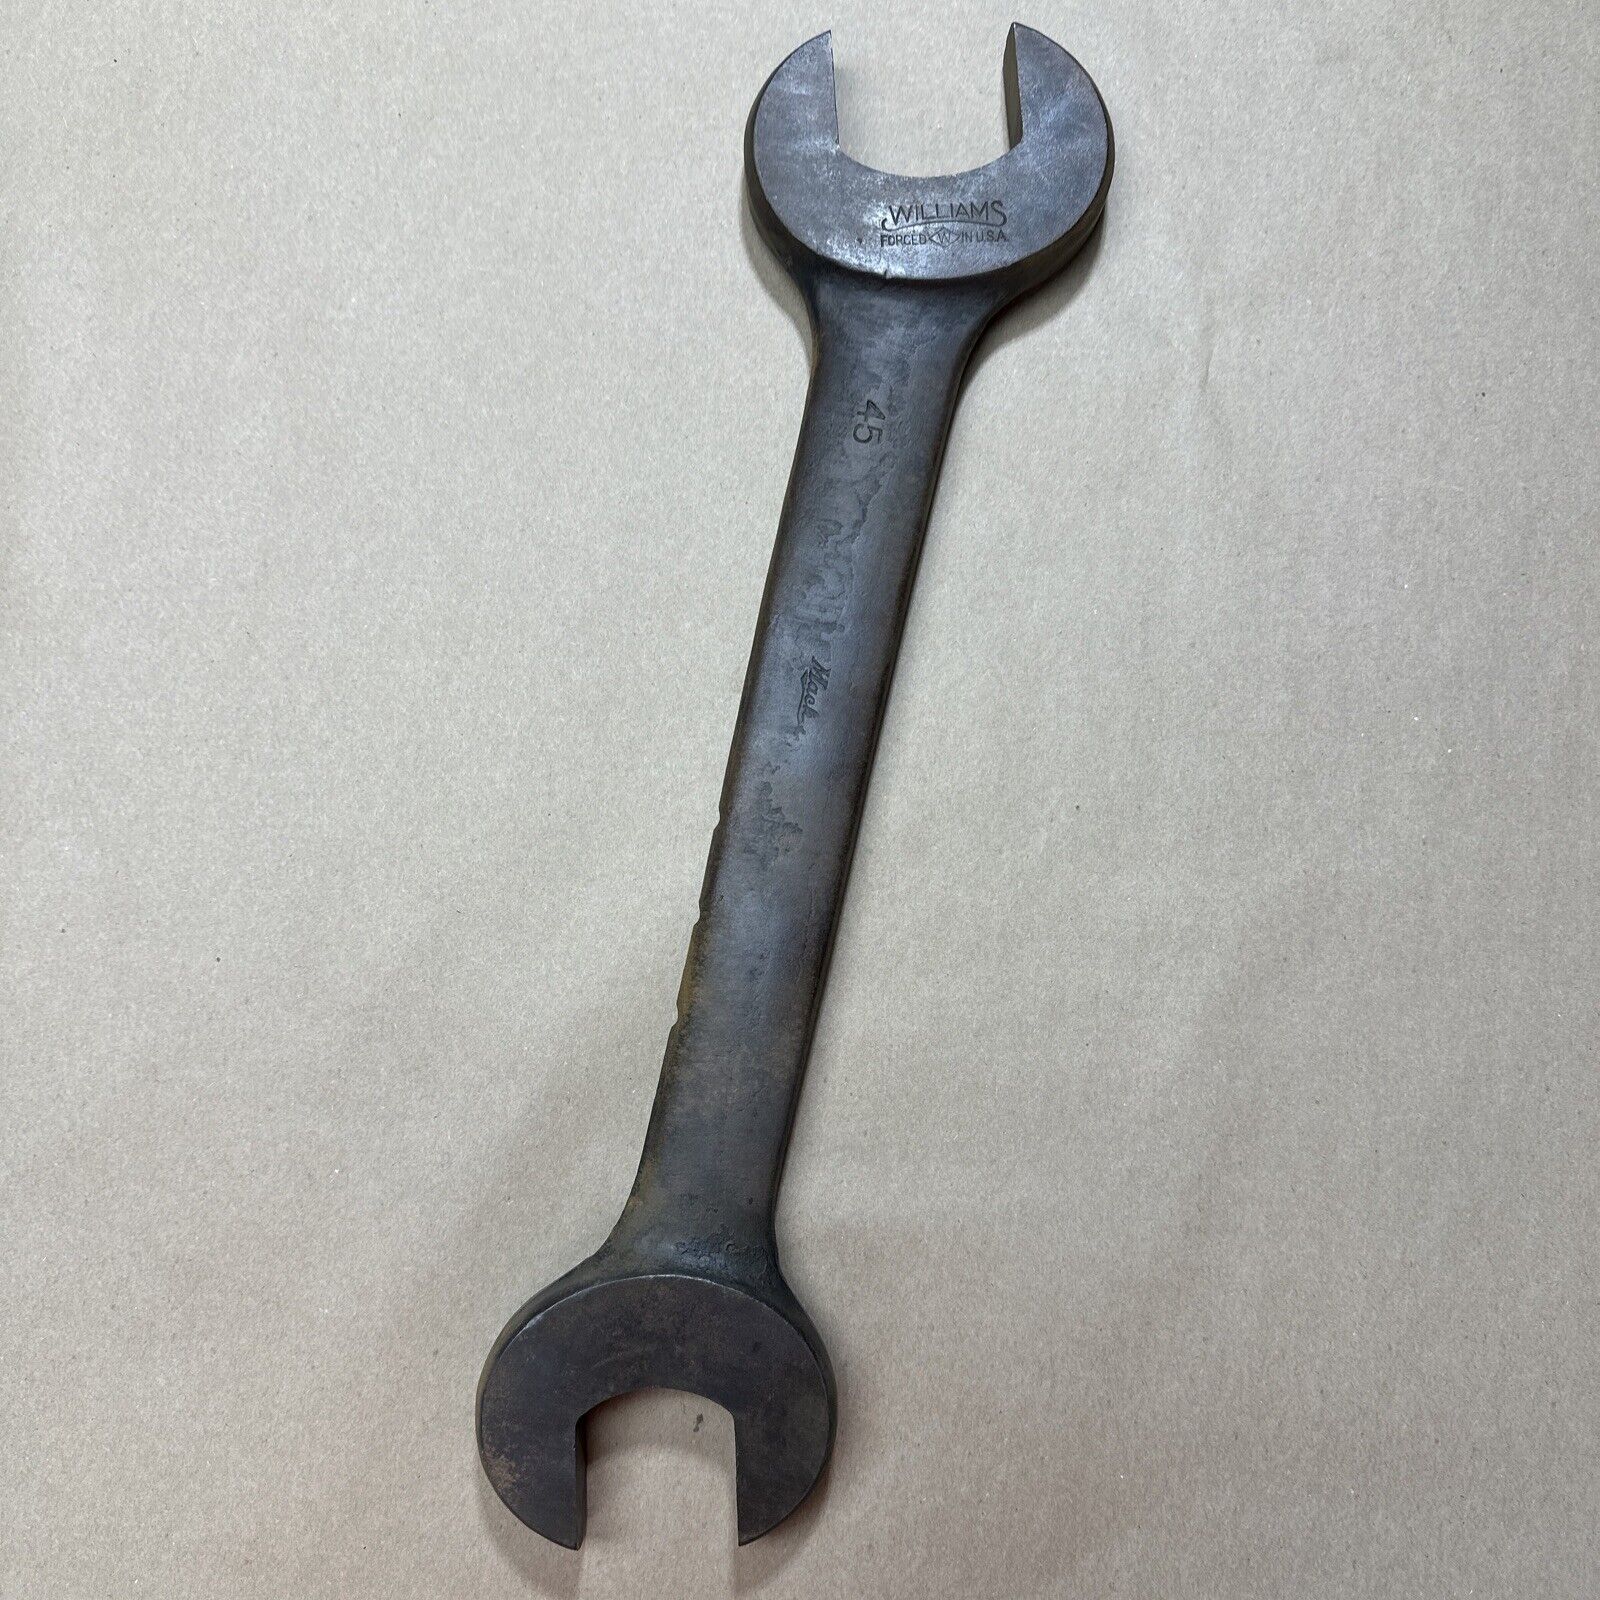 Vintage Williams No. 45 Double Open Wrench 2 1/4” X 1 3/4” Mack